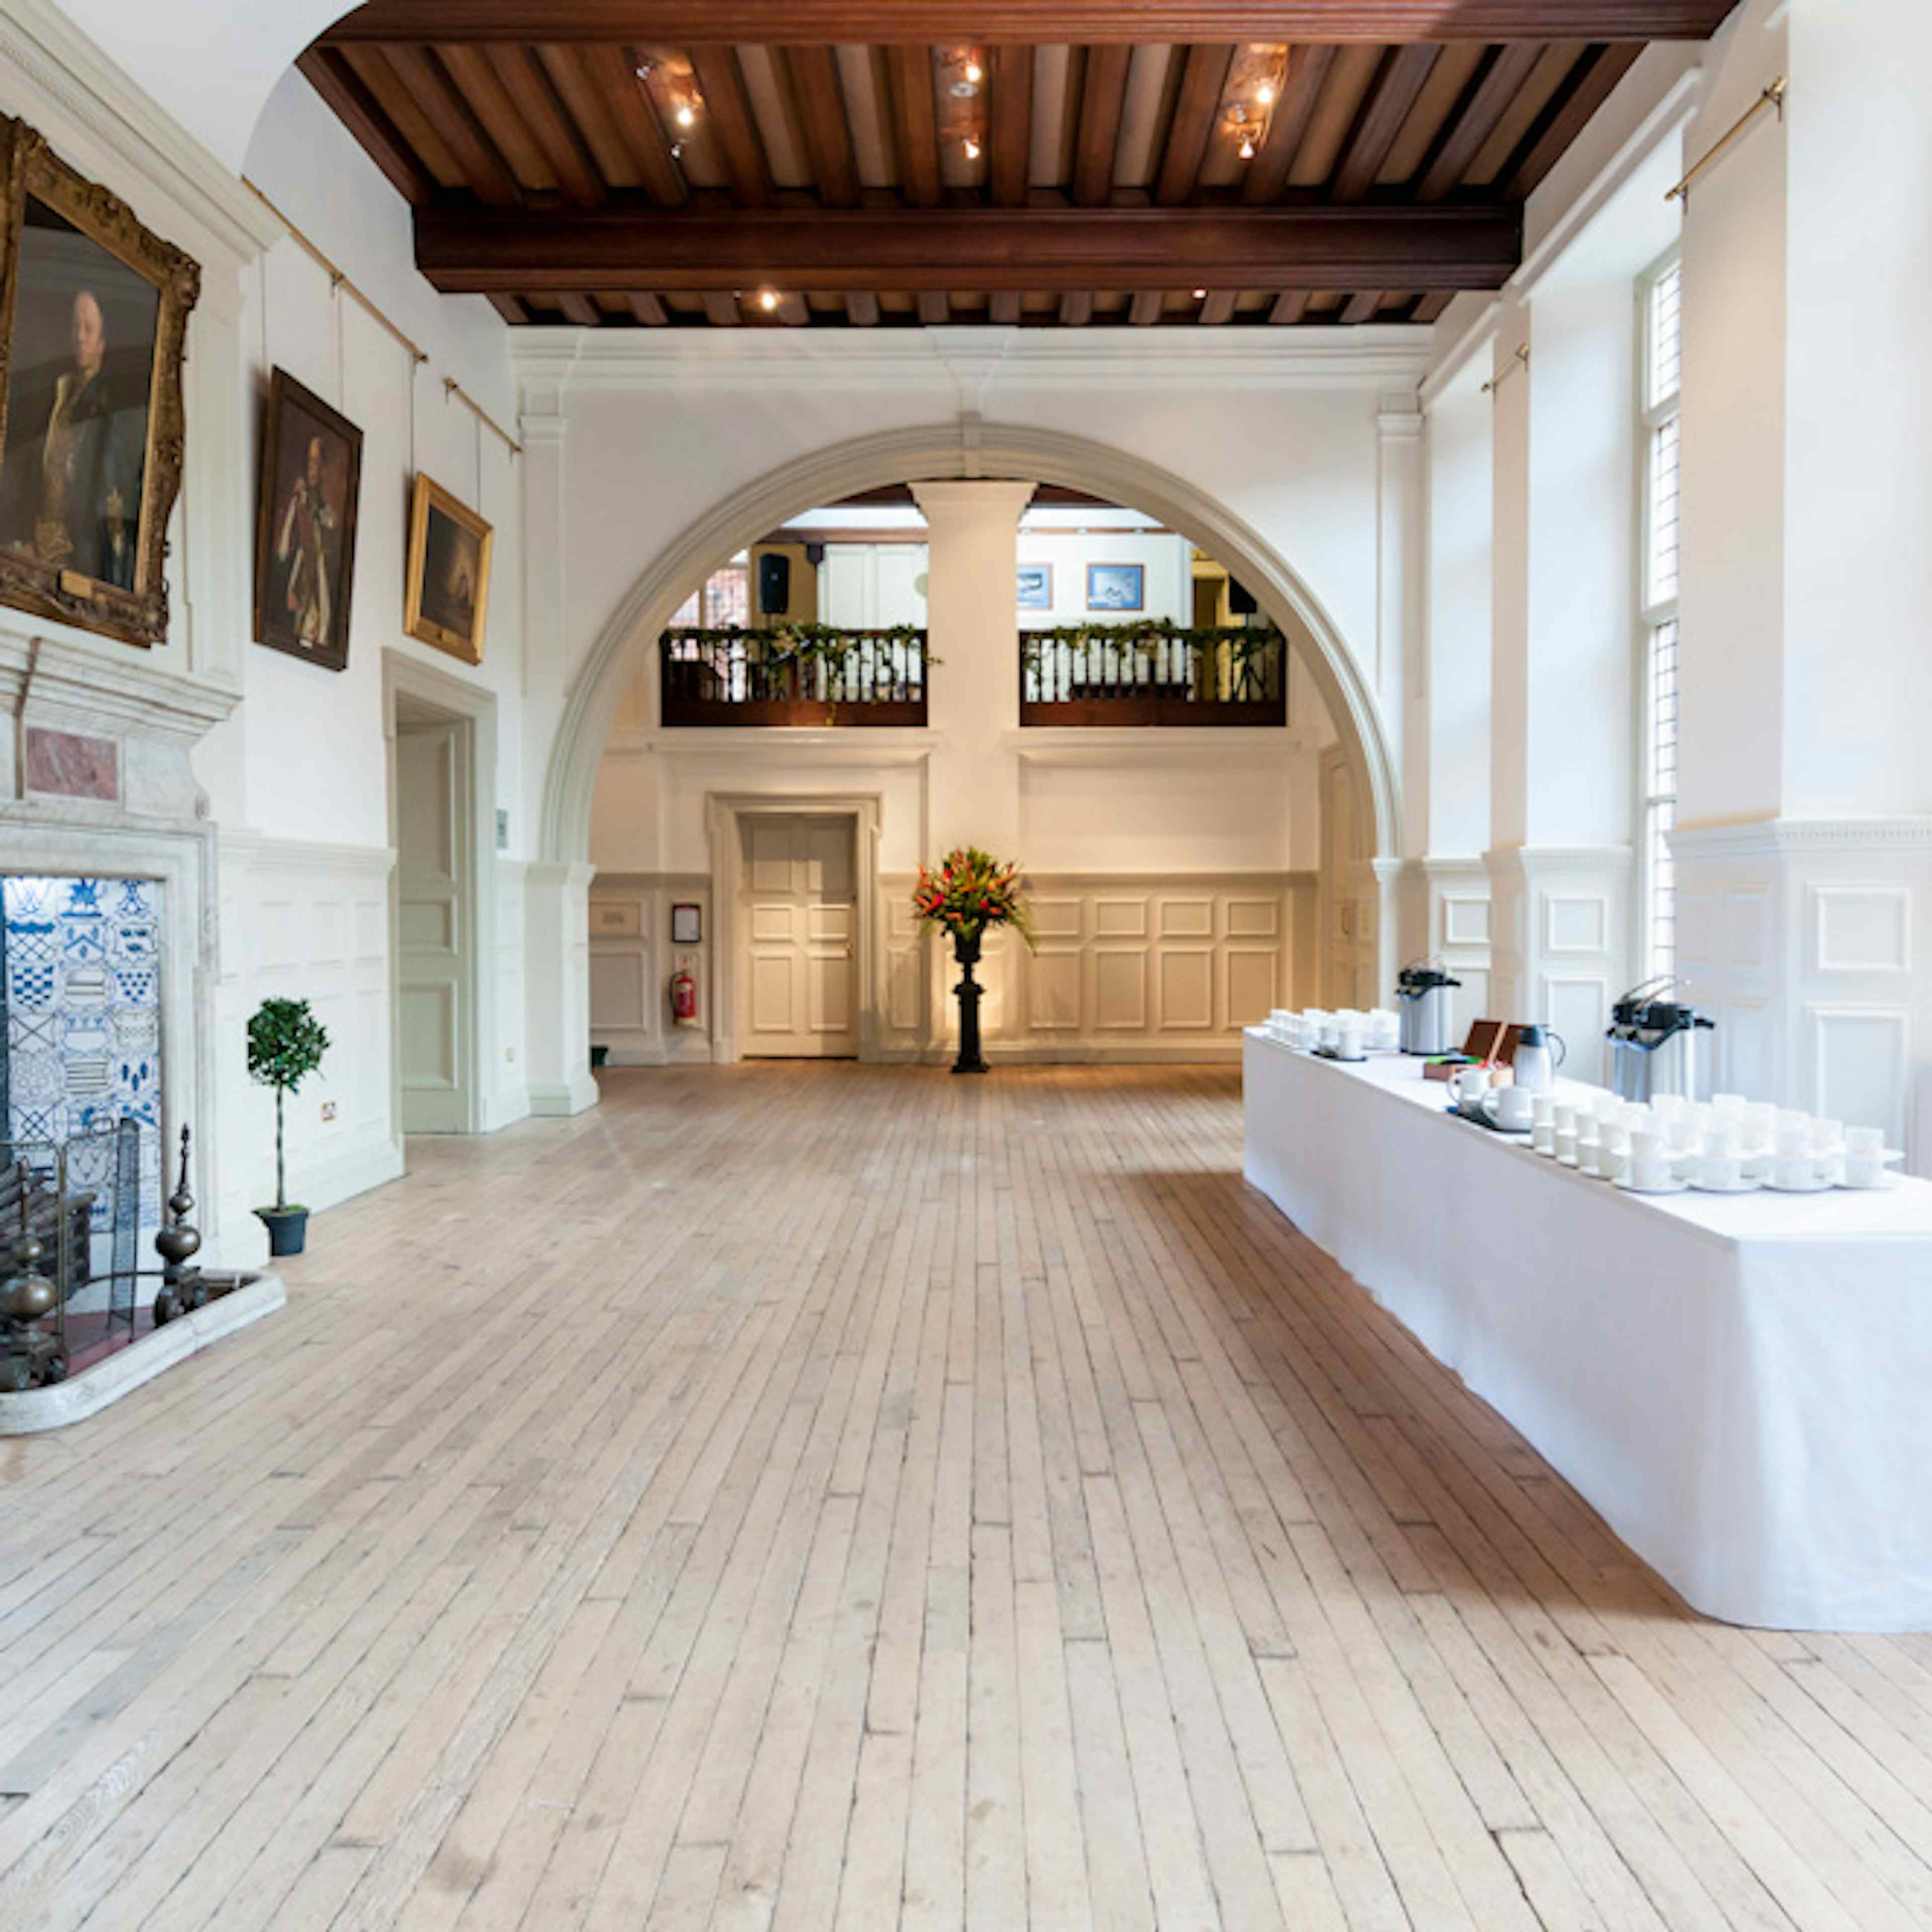 Royal Geographical Society - Main Hall & Education Centre image 3